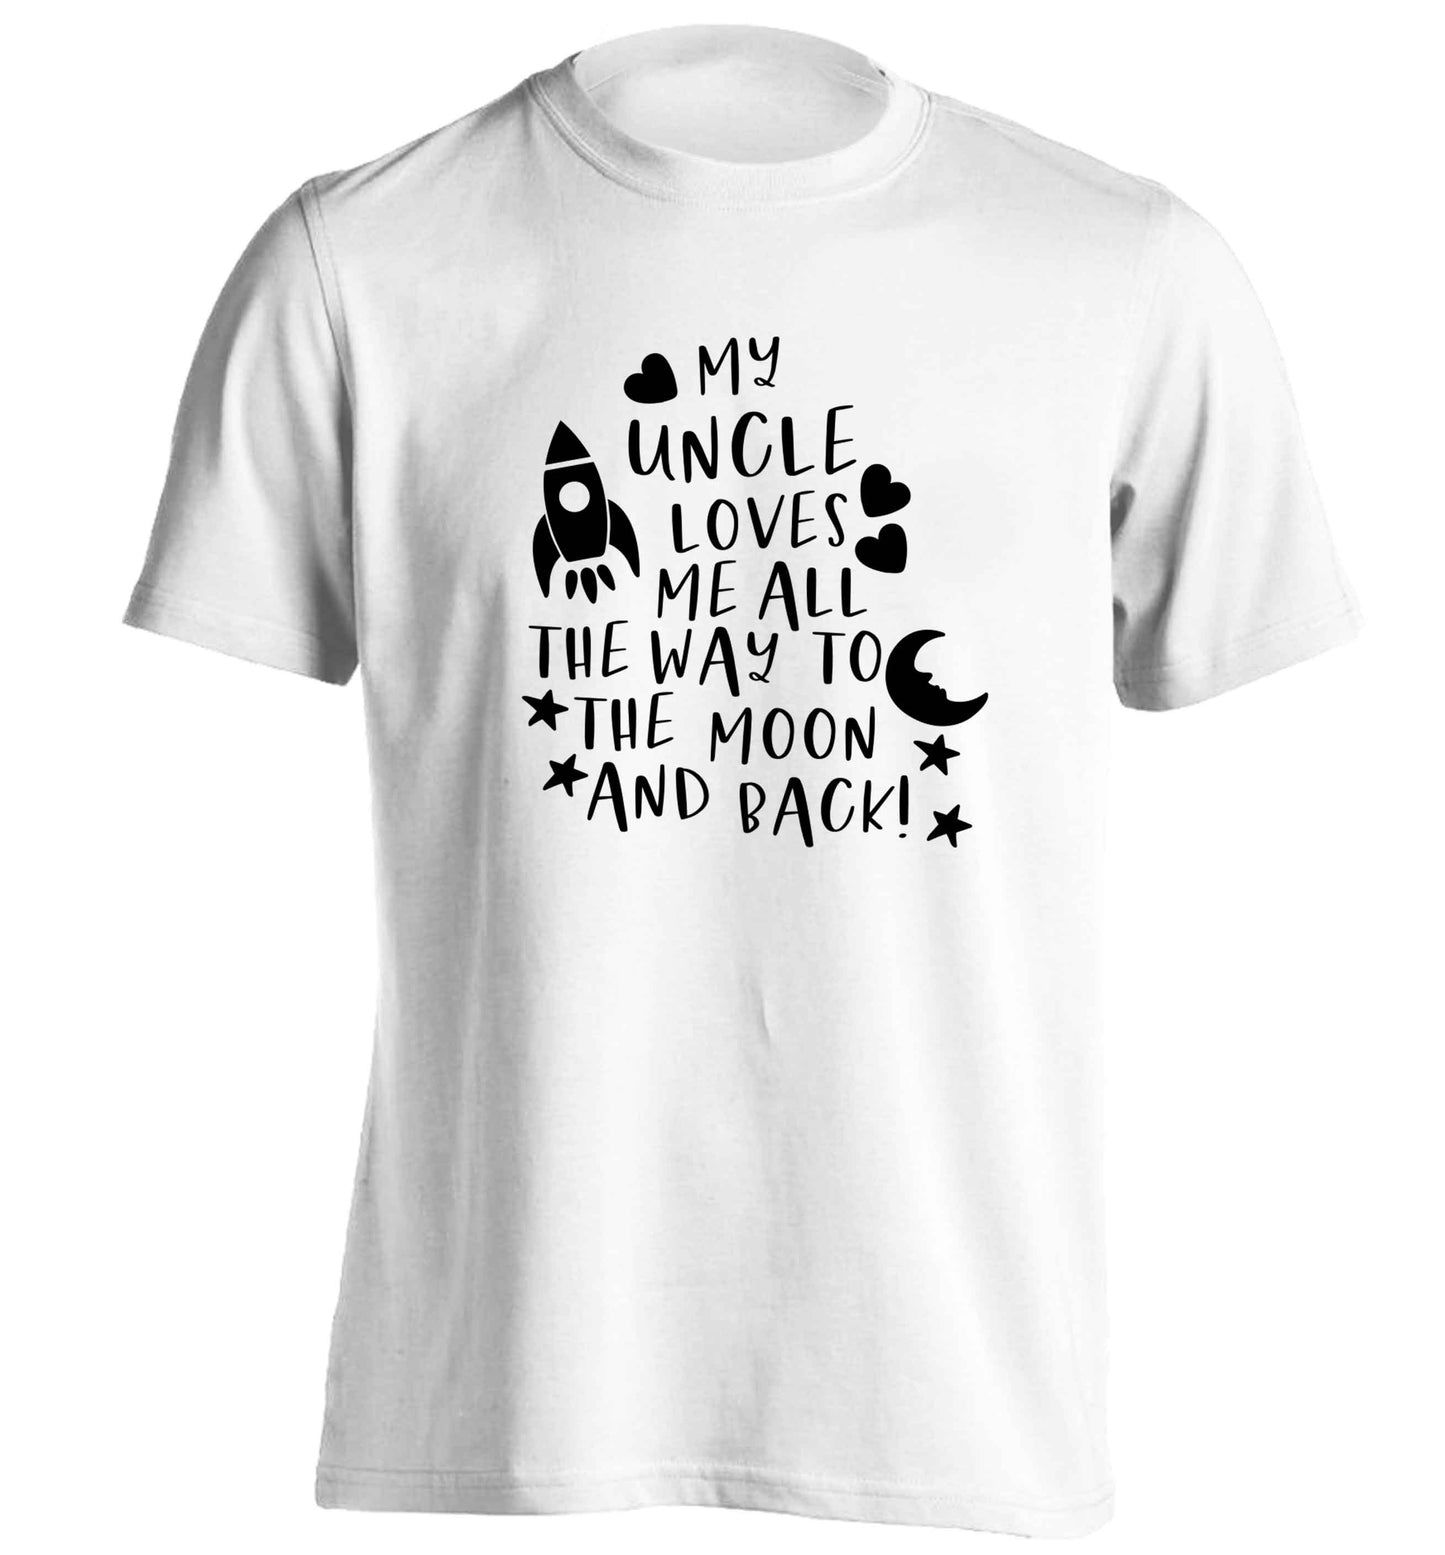 My uncle loves me all the way to the moon and back adults unisex white Tshirt 2XL